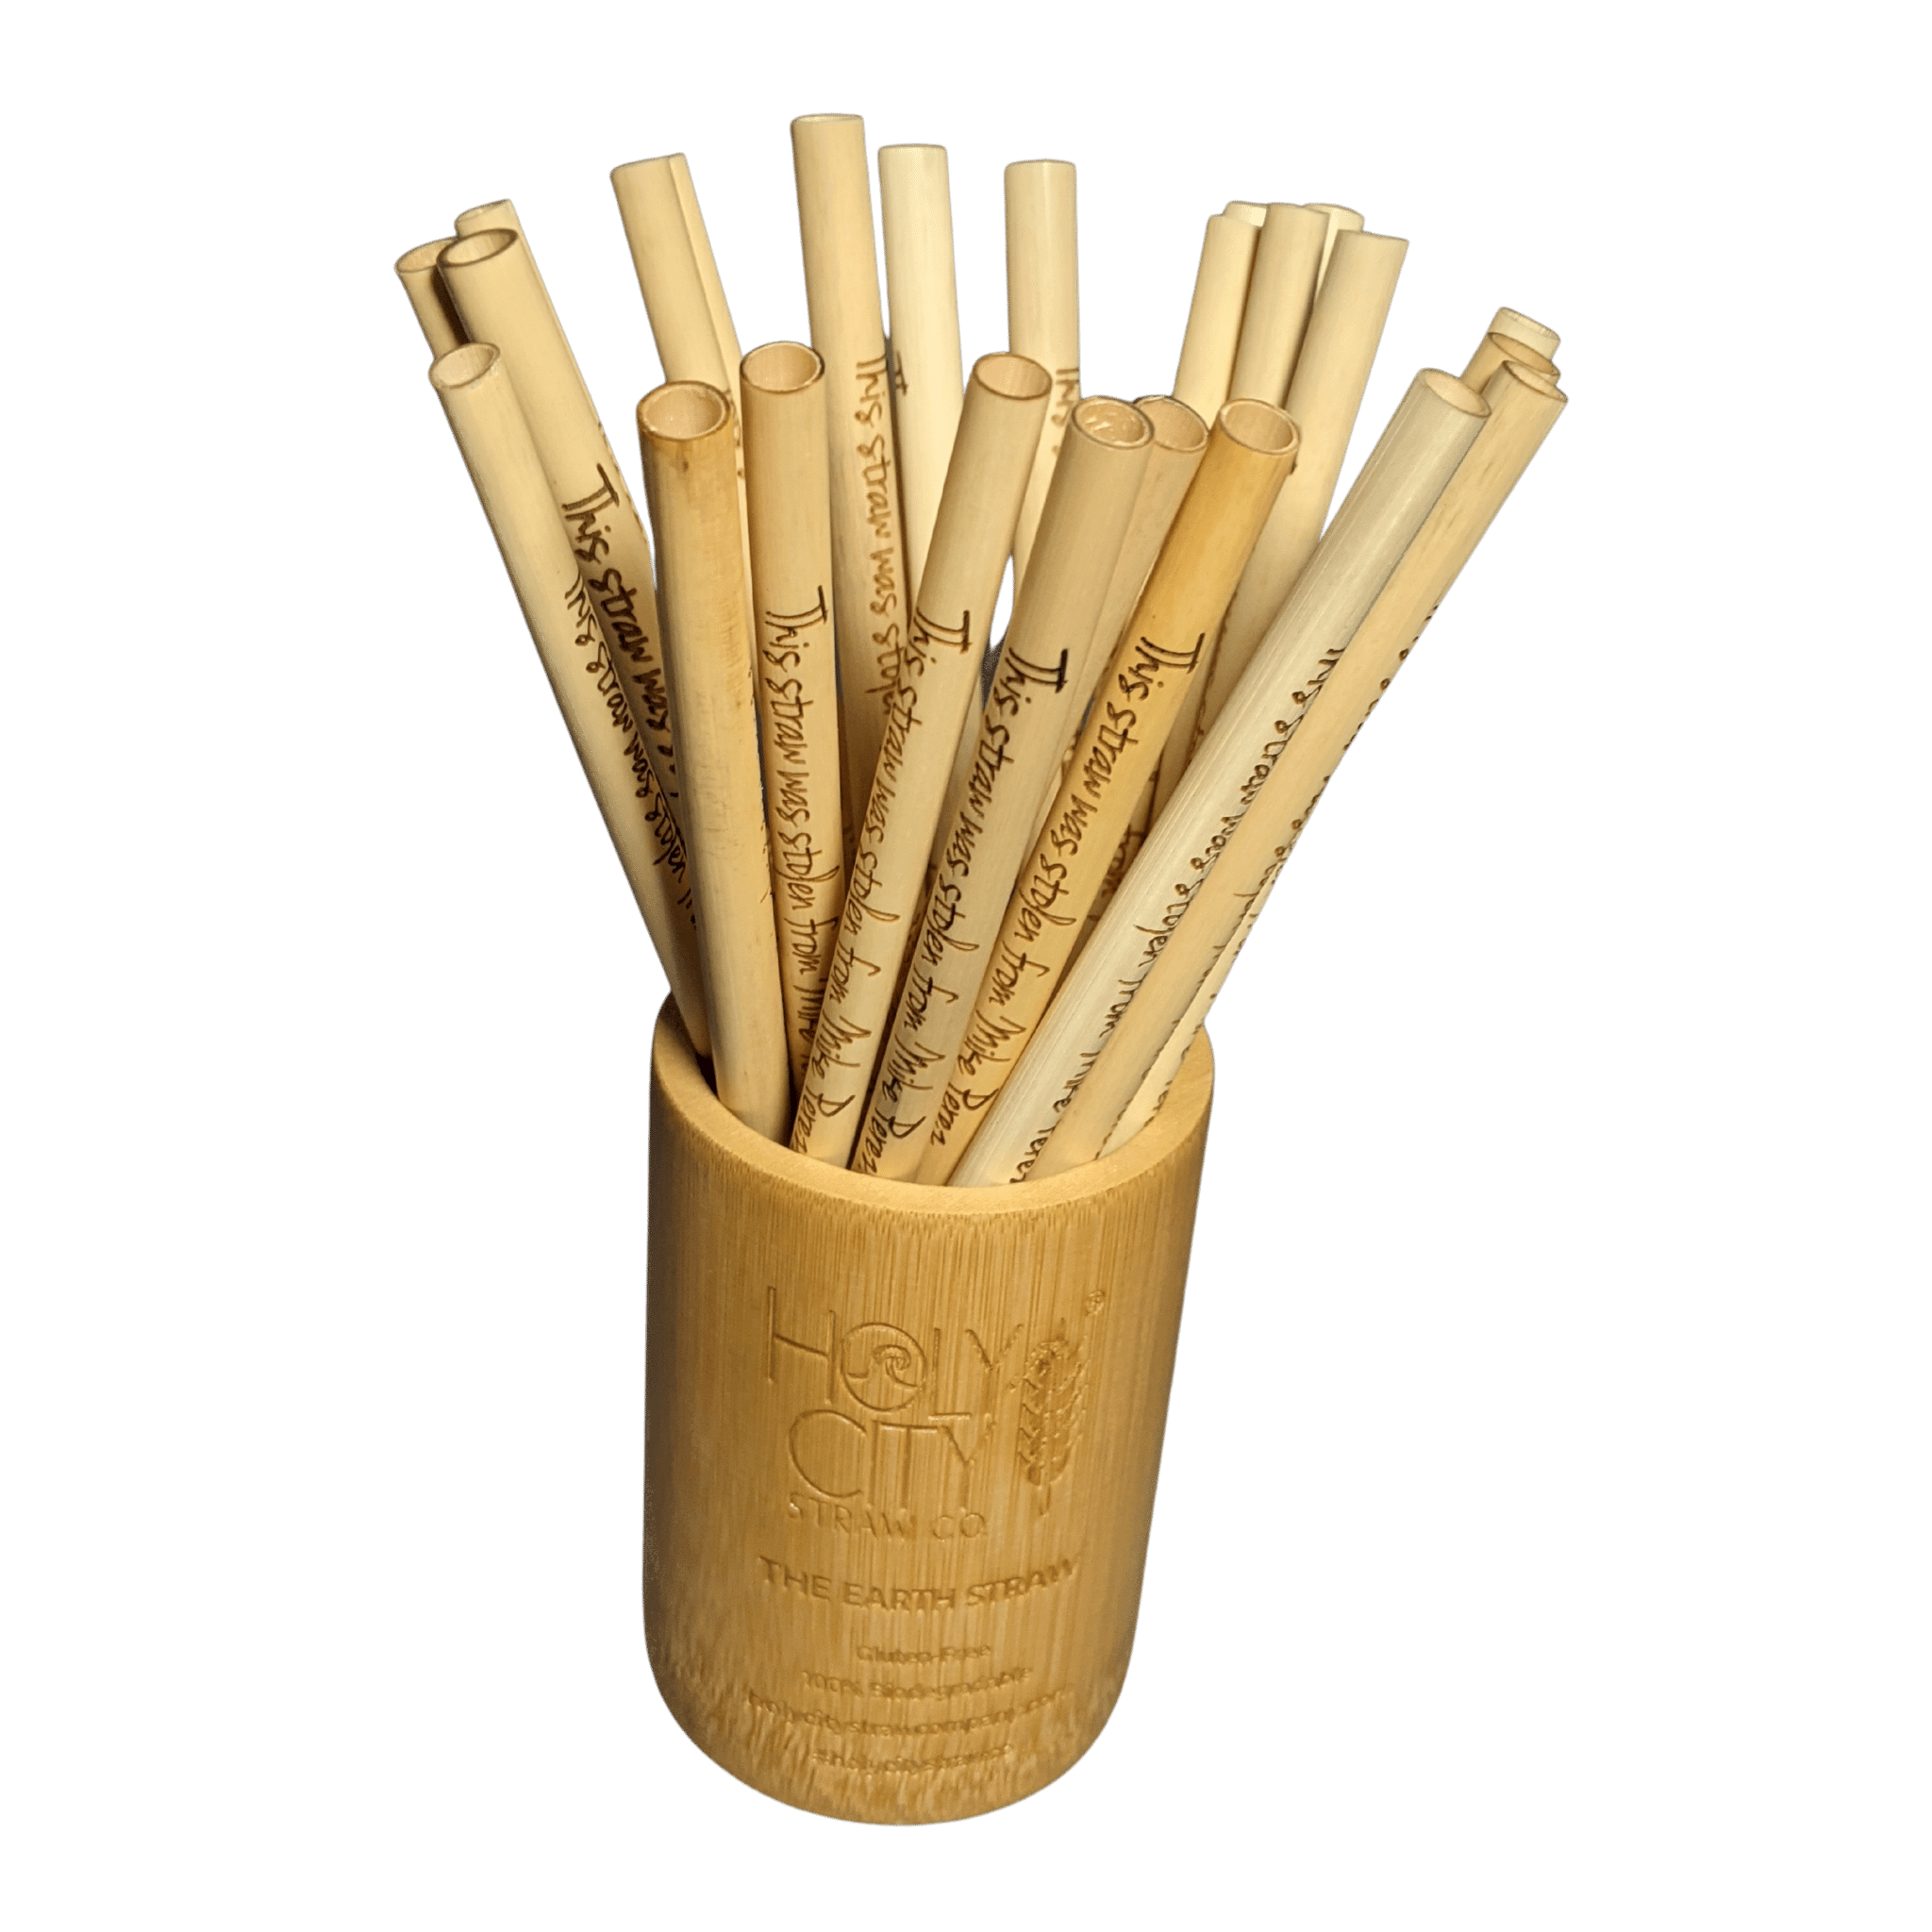 Holy City Straw Company Branded small Bamboo Straw Holder with straws